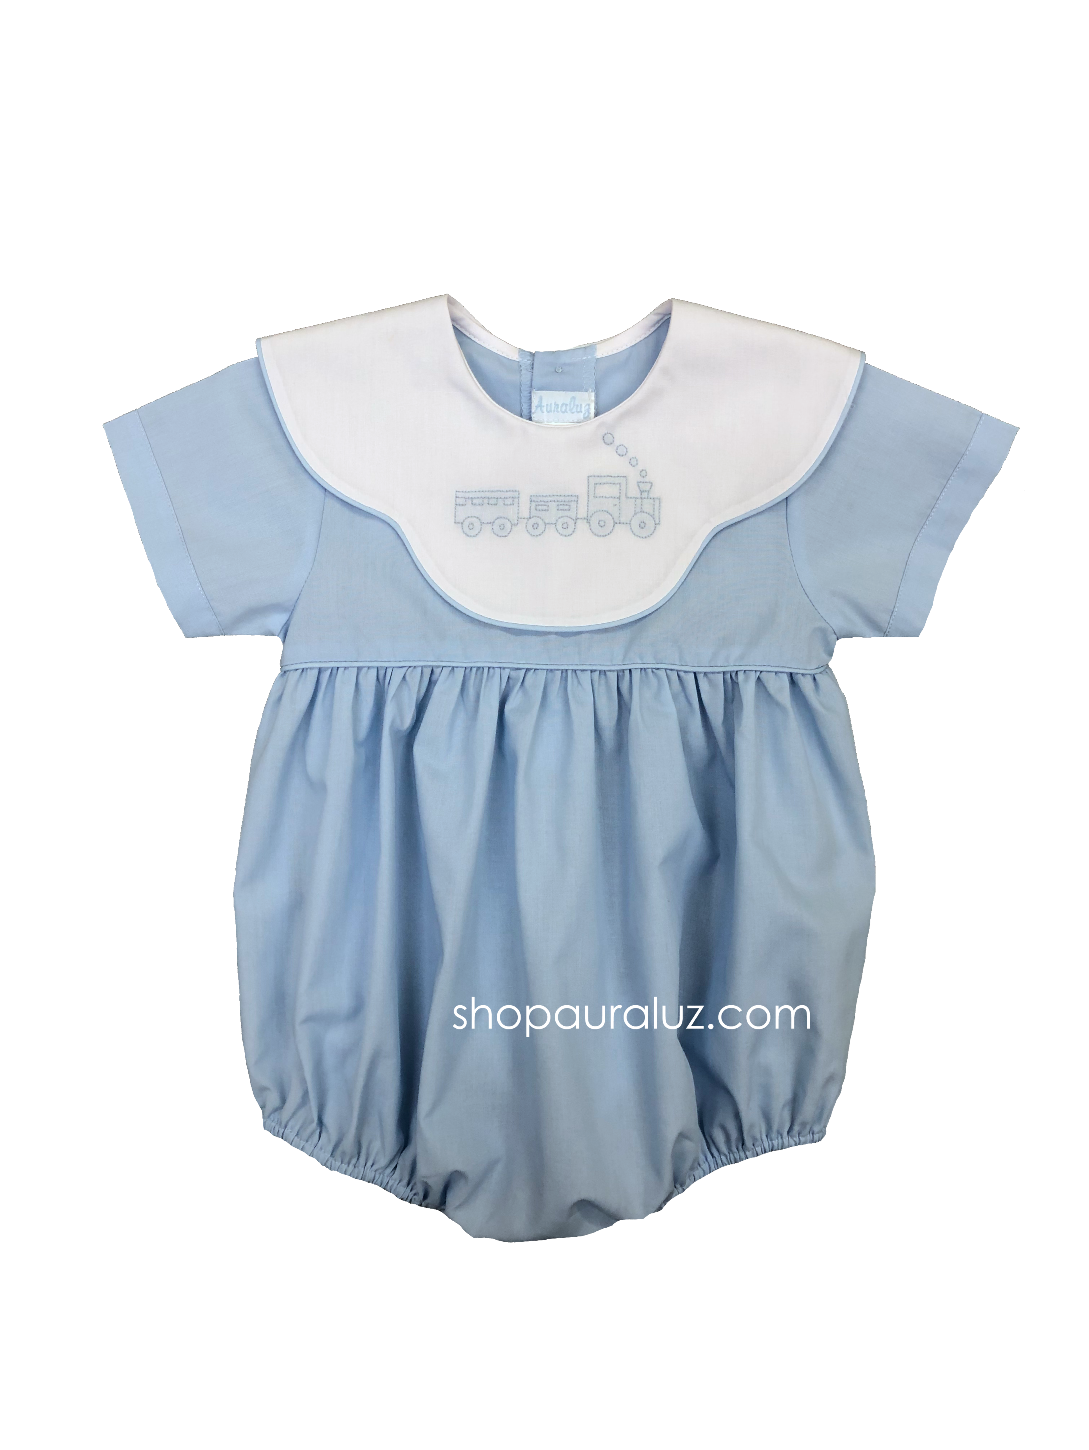 Auraluz Bubble, s/s...Blue w/binding, white scalloped collar and embroidered train